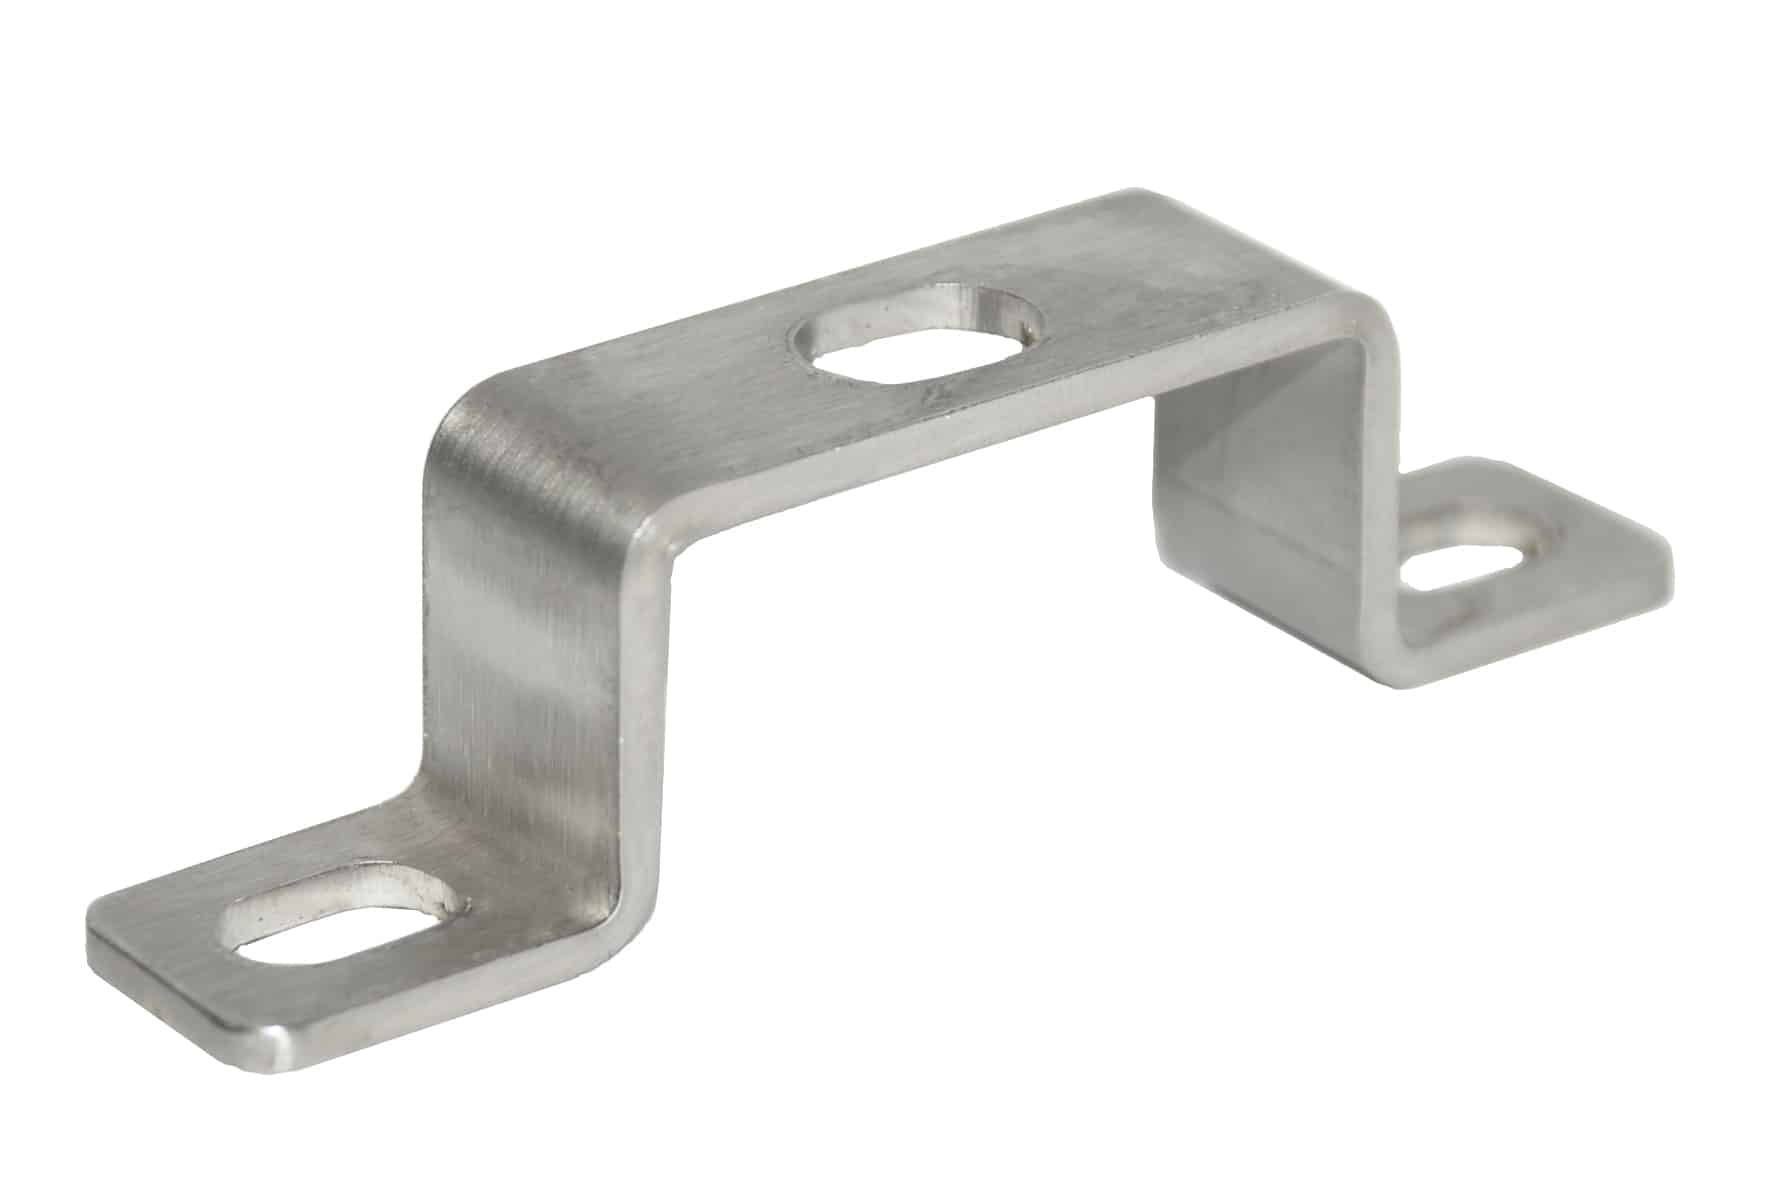 Stainless steel foot brace clamp